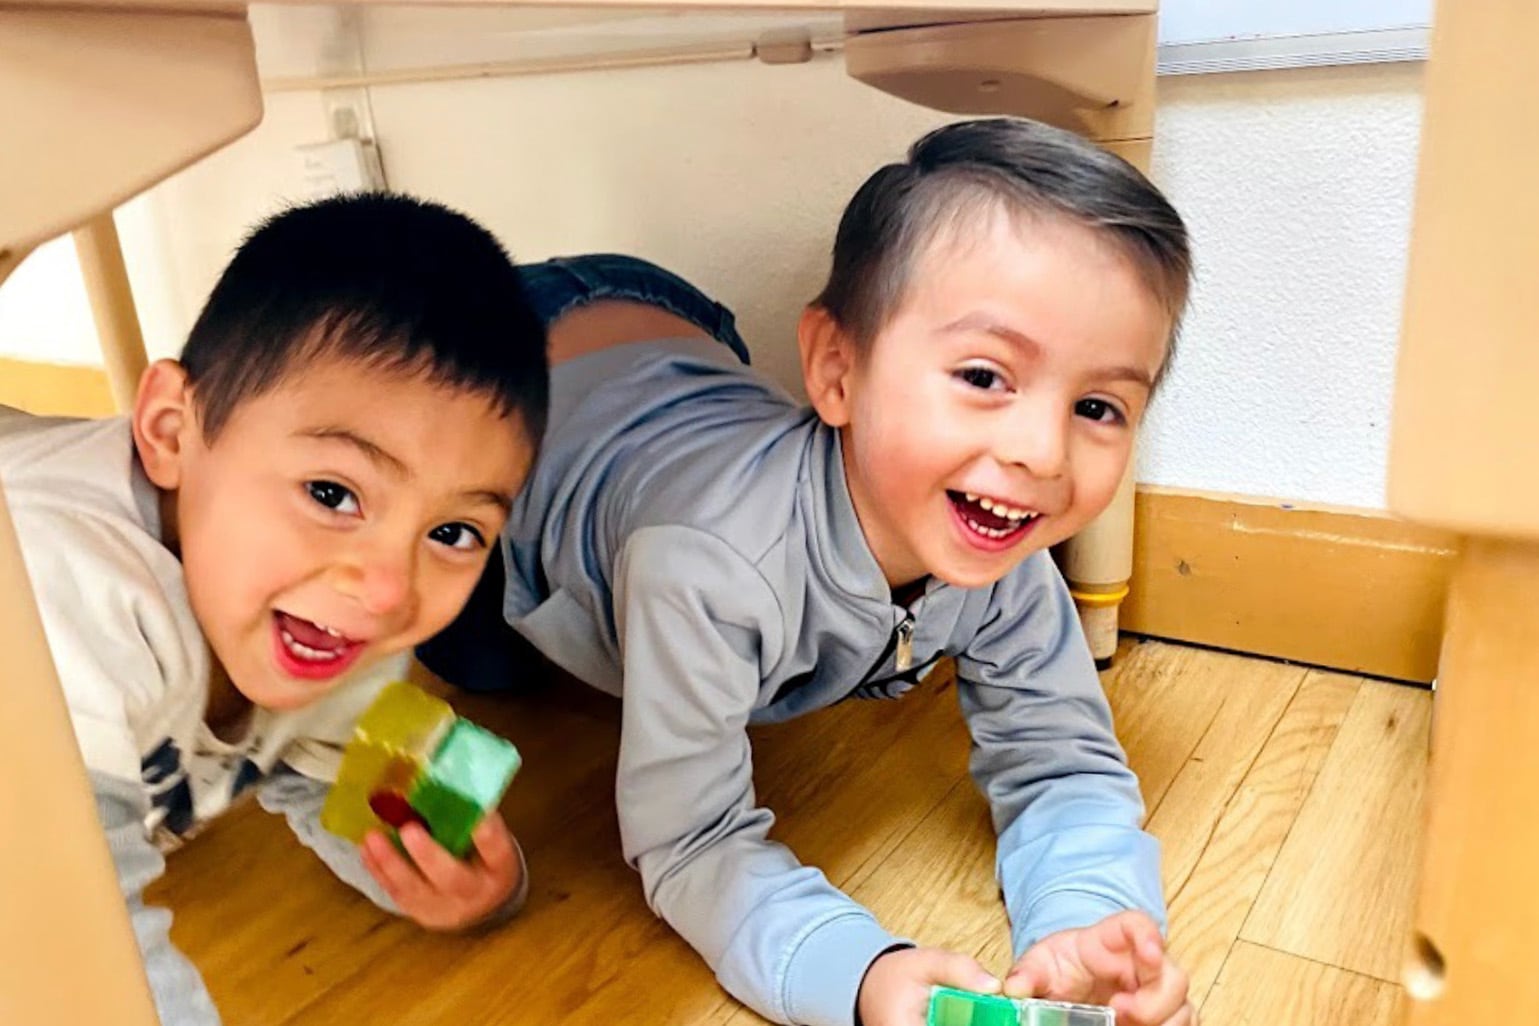 Two young boys smile while crouched under a table on a wood floor.